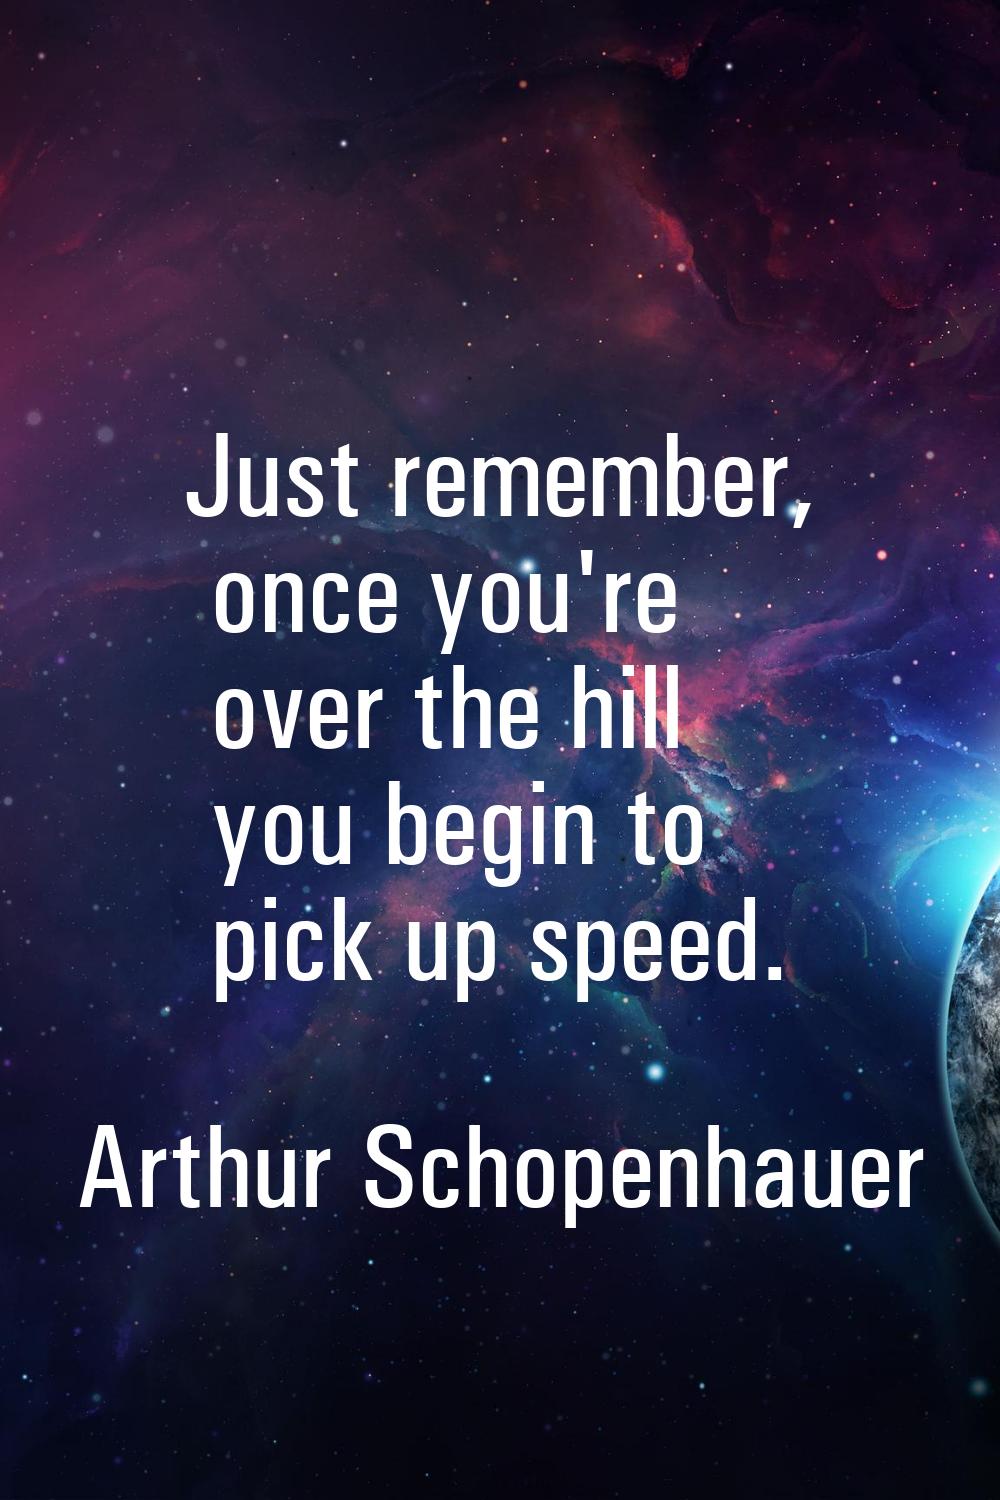 Just remember, once you're over the hill you begin to pick up speed.